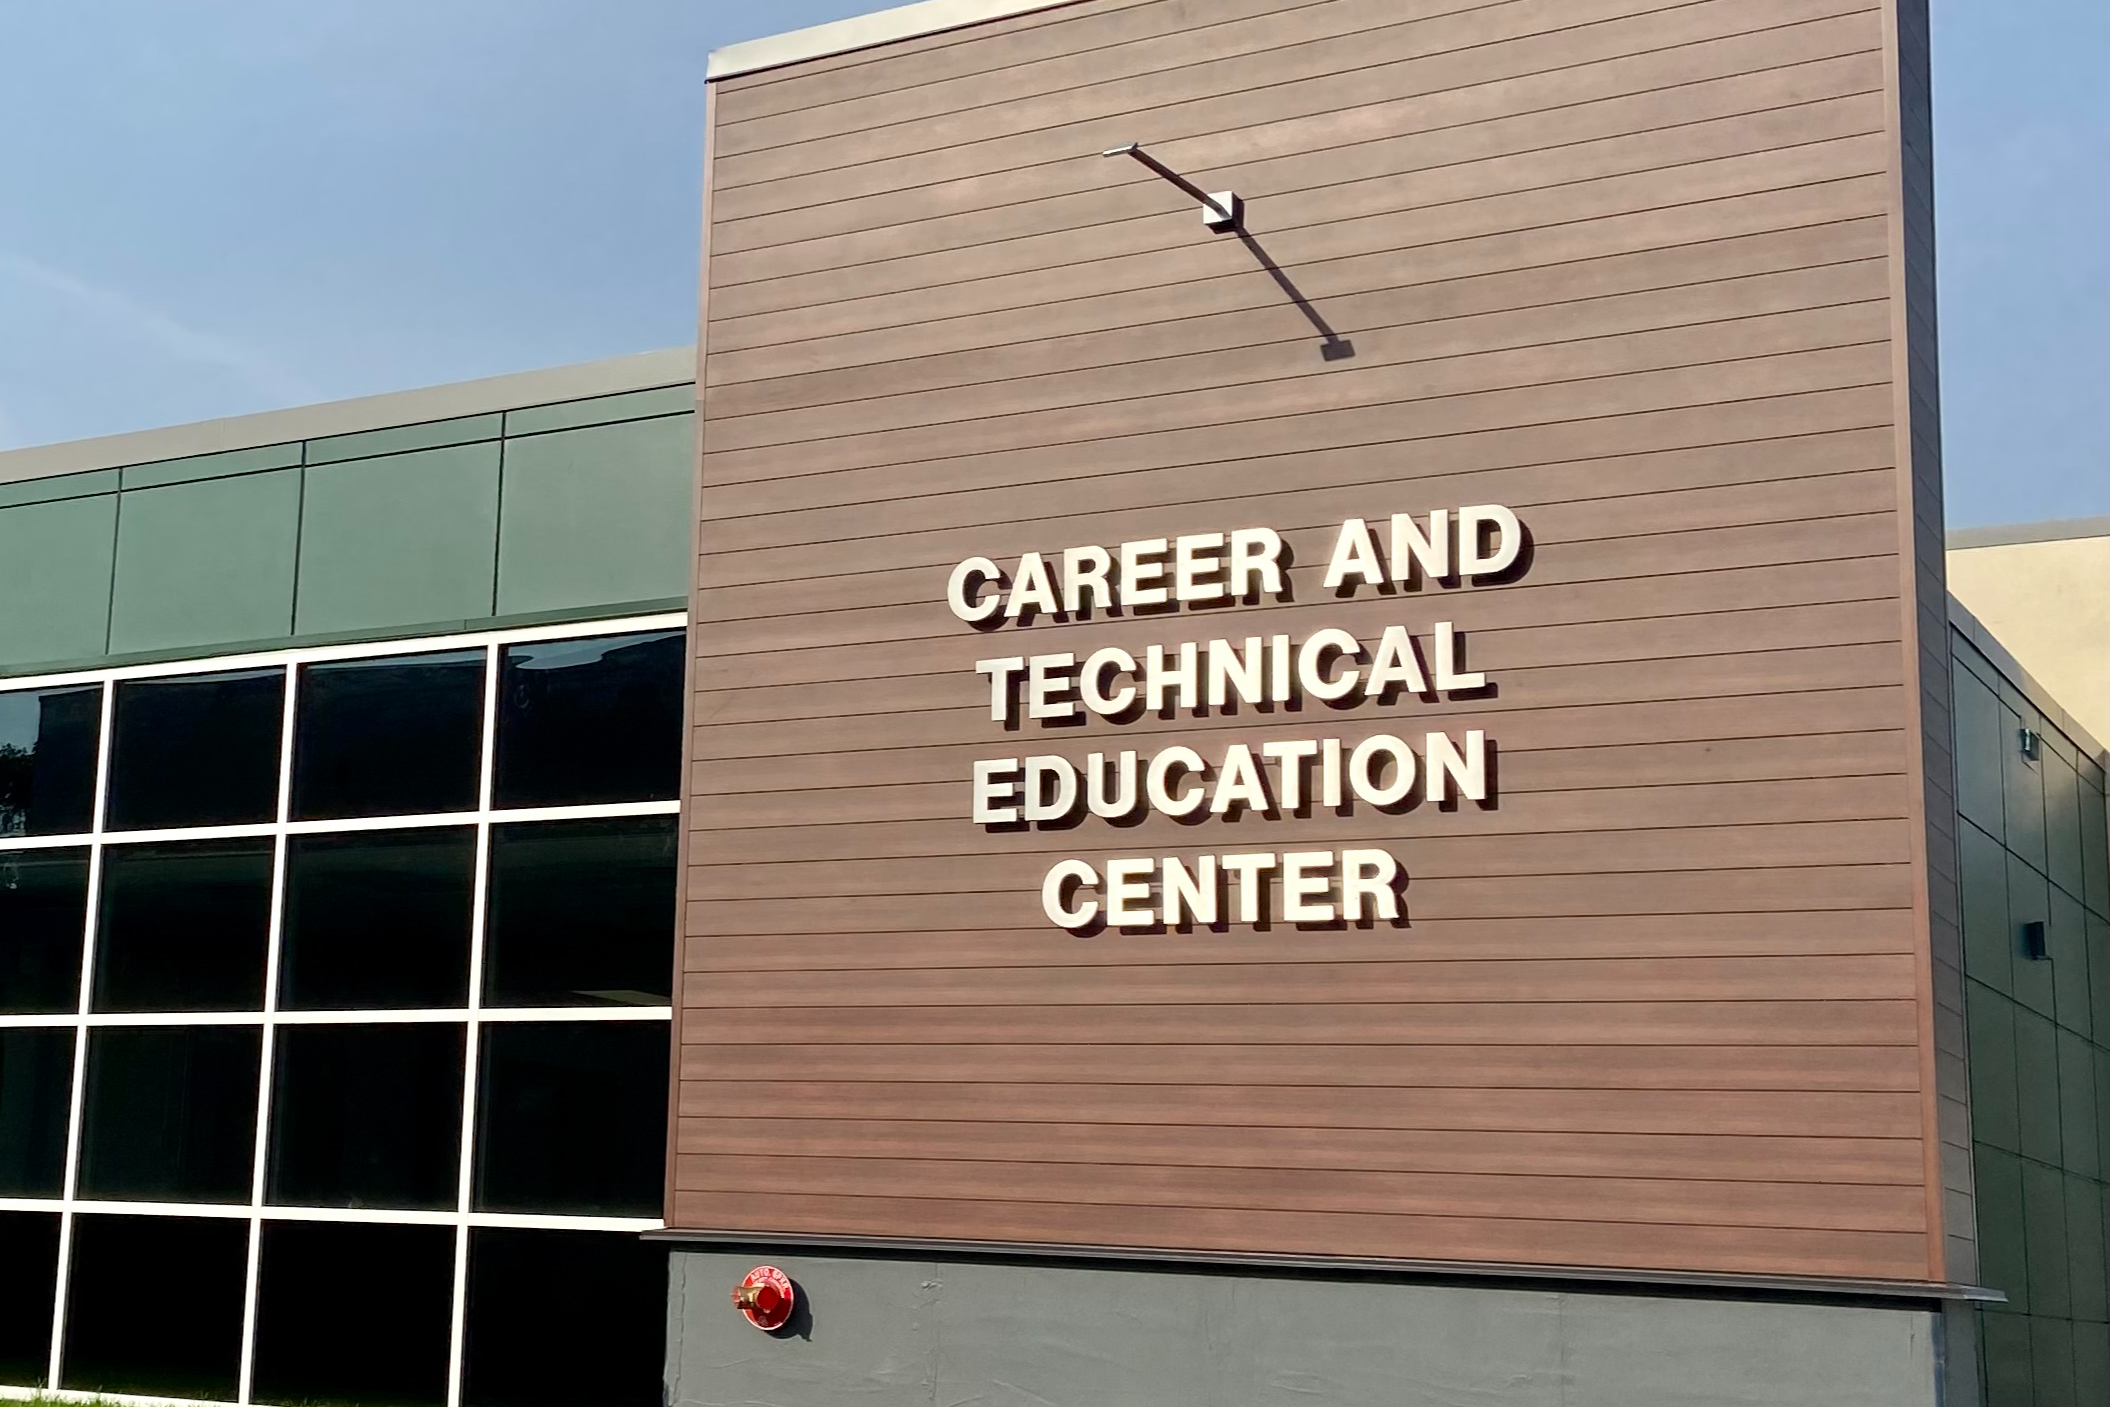 Career and Technical Education Center